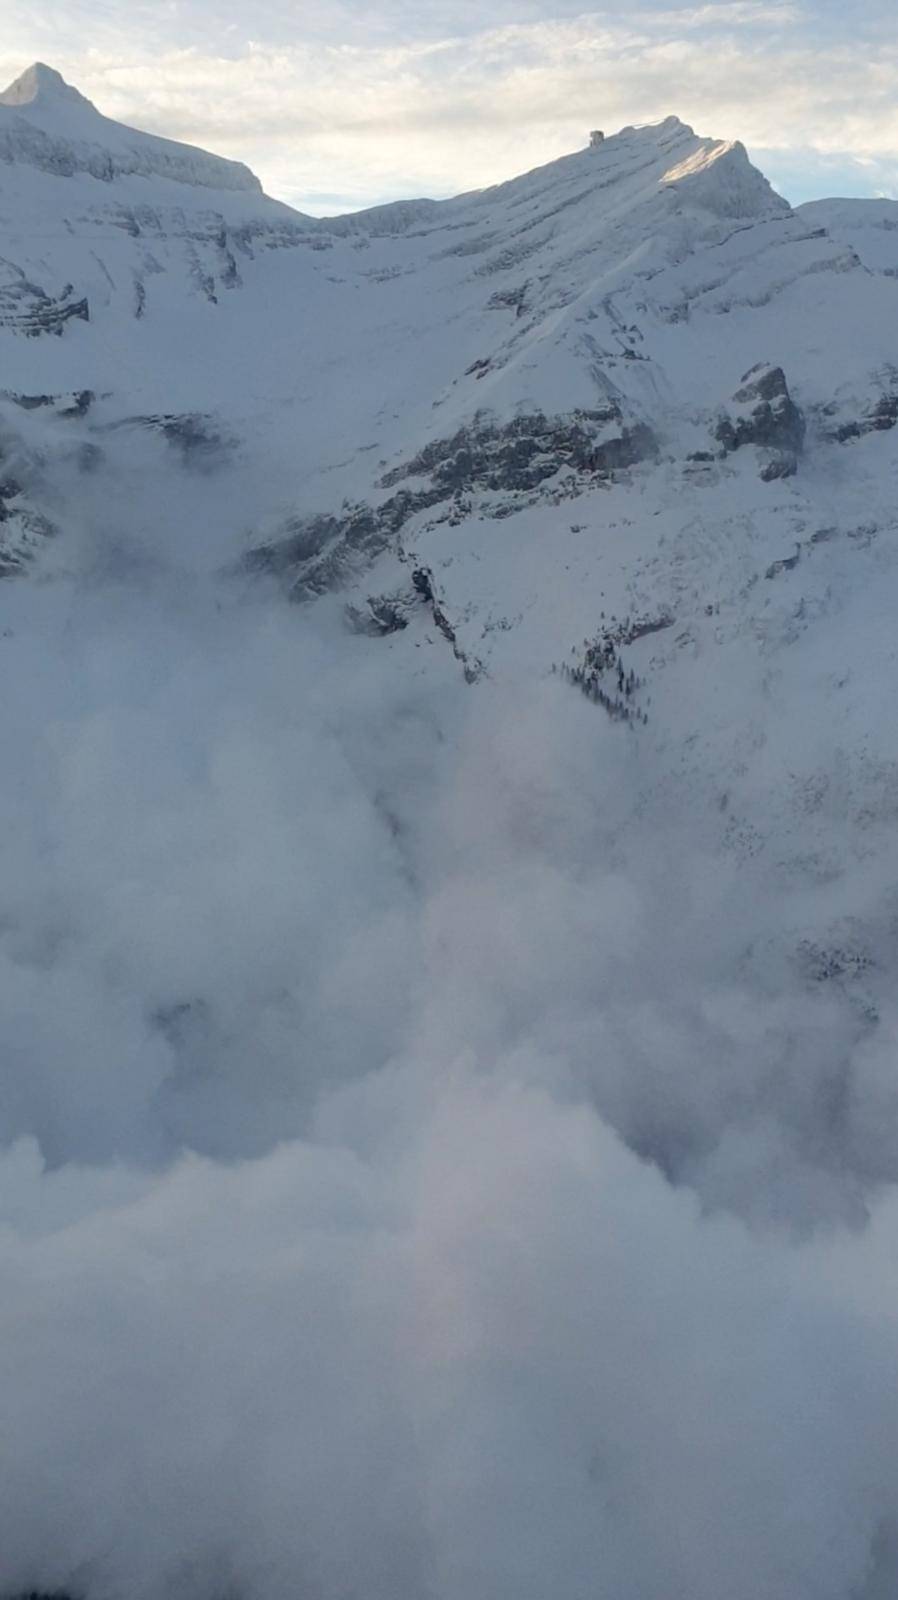 An avalanche after a controlled explosion is pictured at Glacier 3000 in Les Diablerets